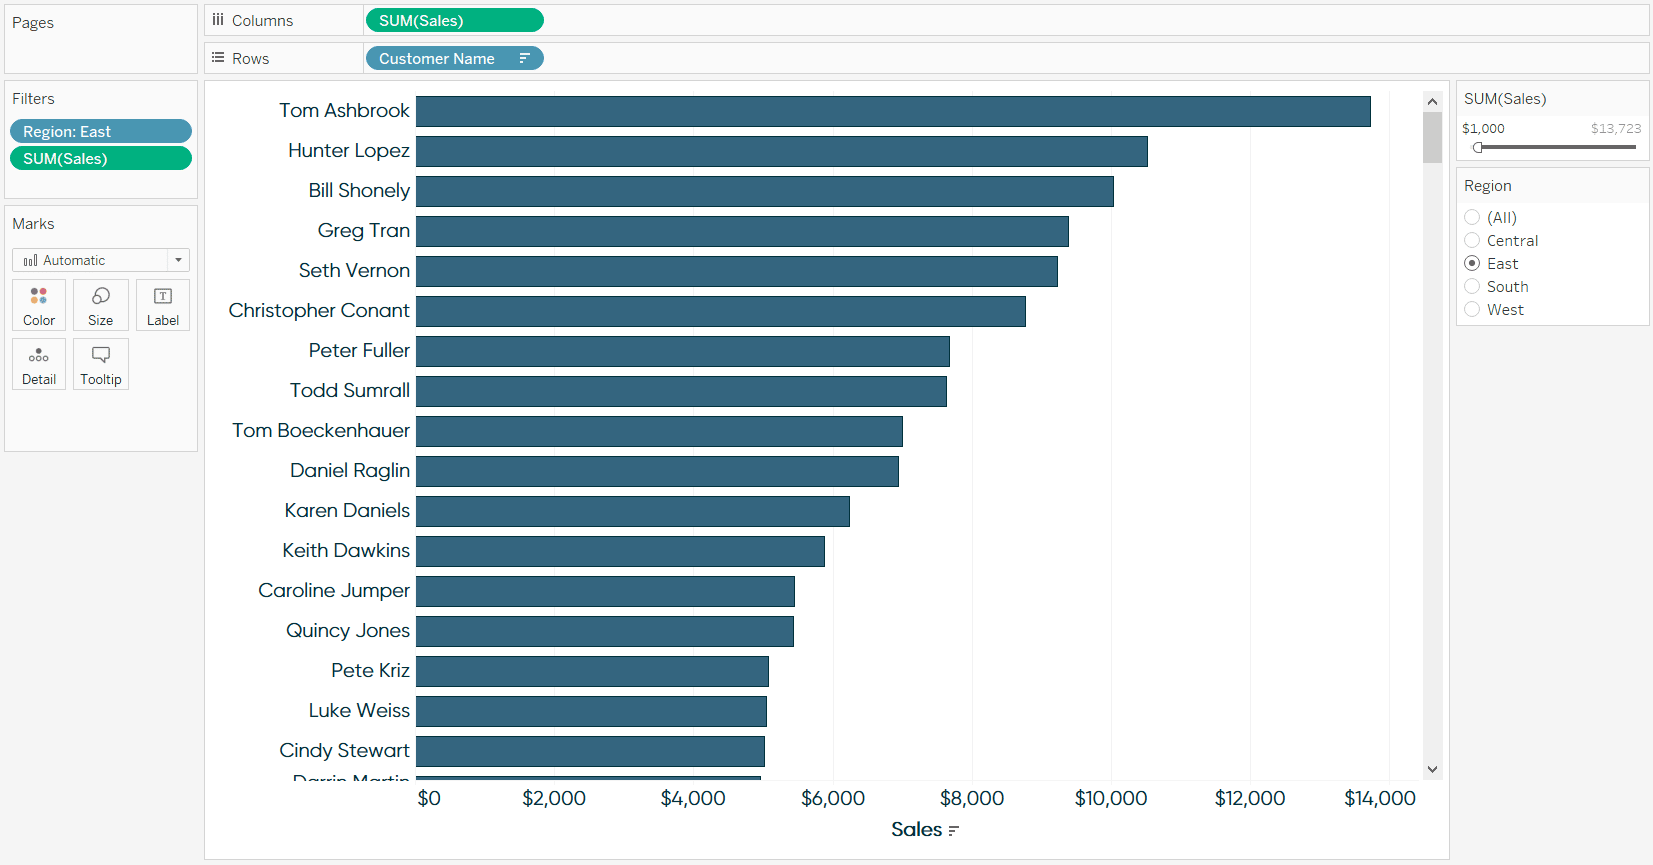 Tableau Sorted Bar Chart Showing Sales by Customer